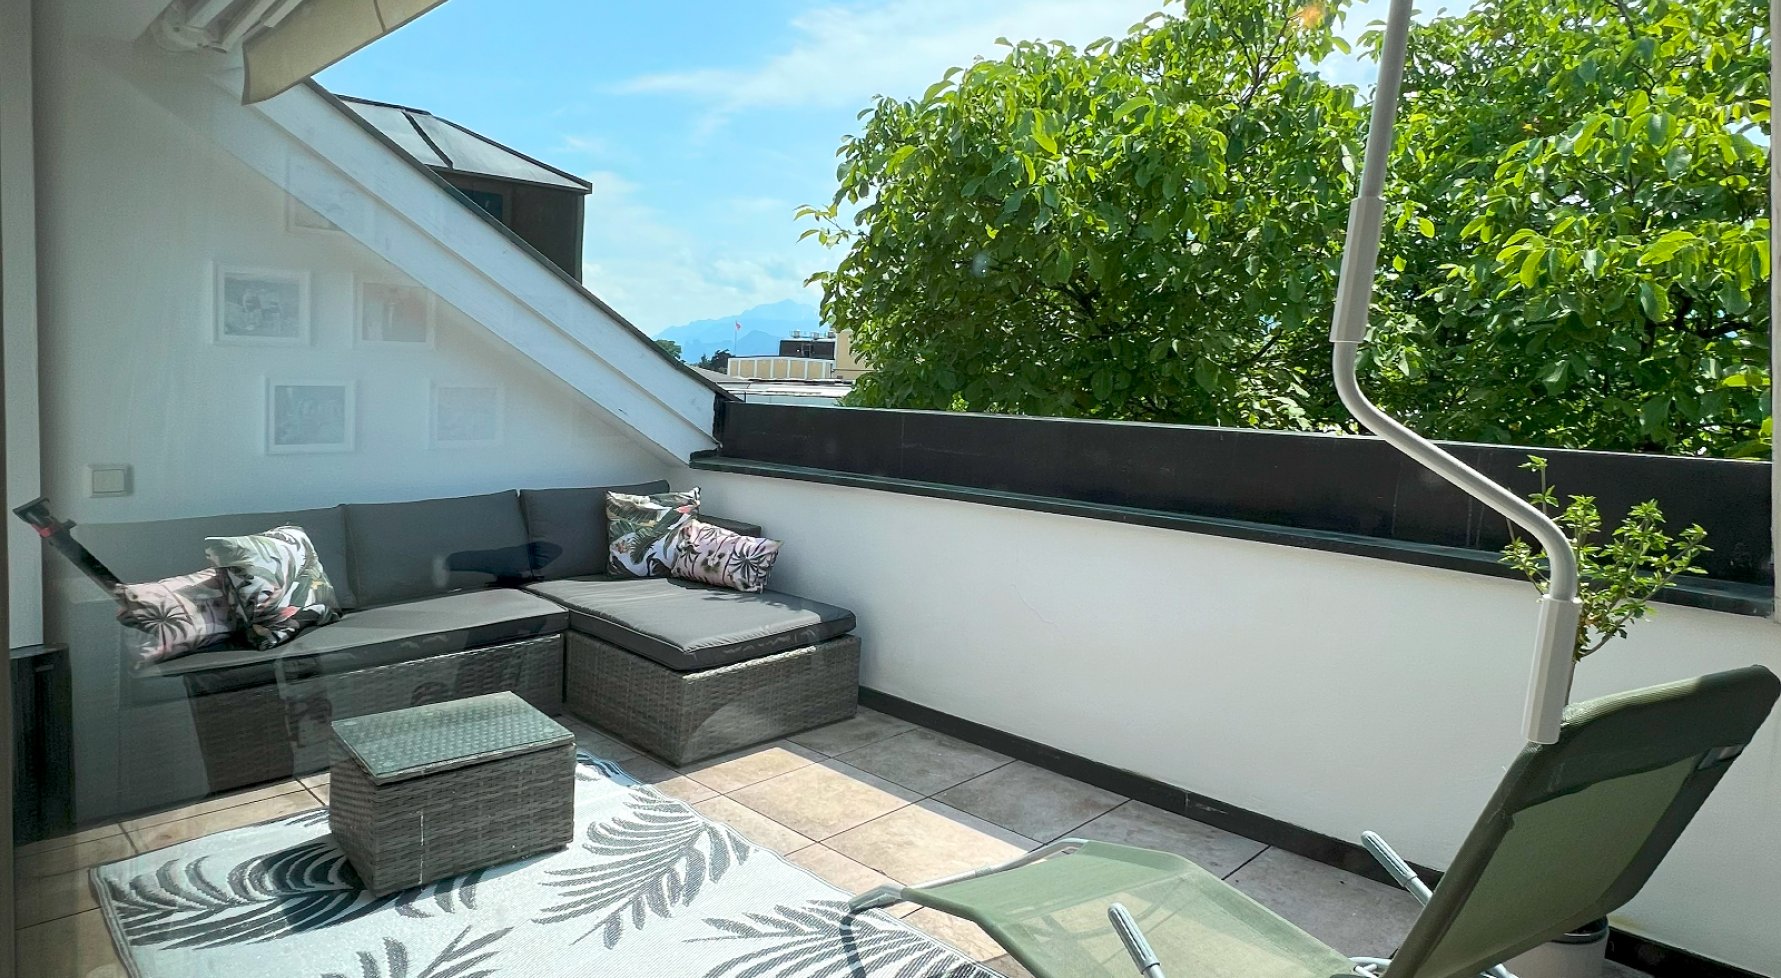 Property in 5020 Salzburg - Maxglan: MAXGLAN PREMIUM LOCATION! Top floor appartment with charming panorama terrace... - picture 1